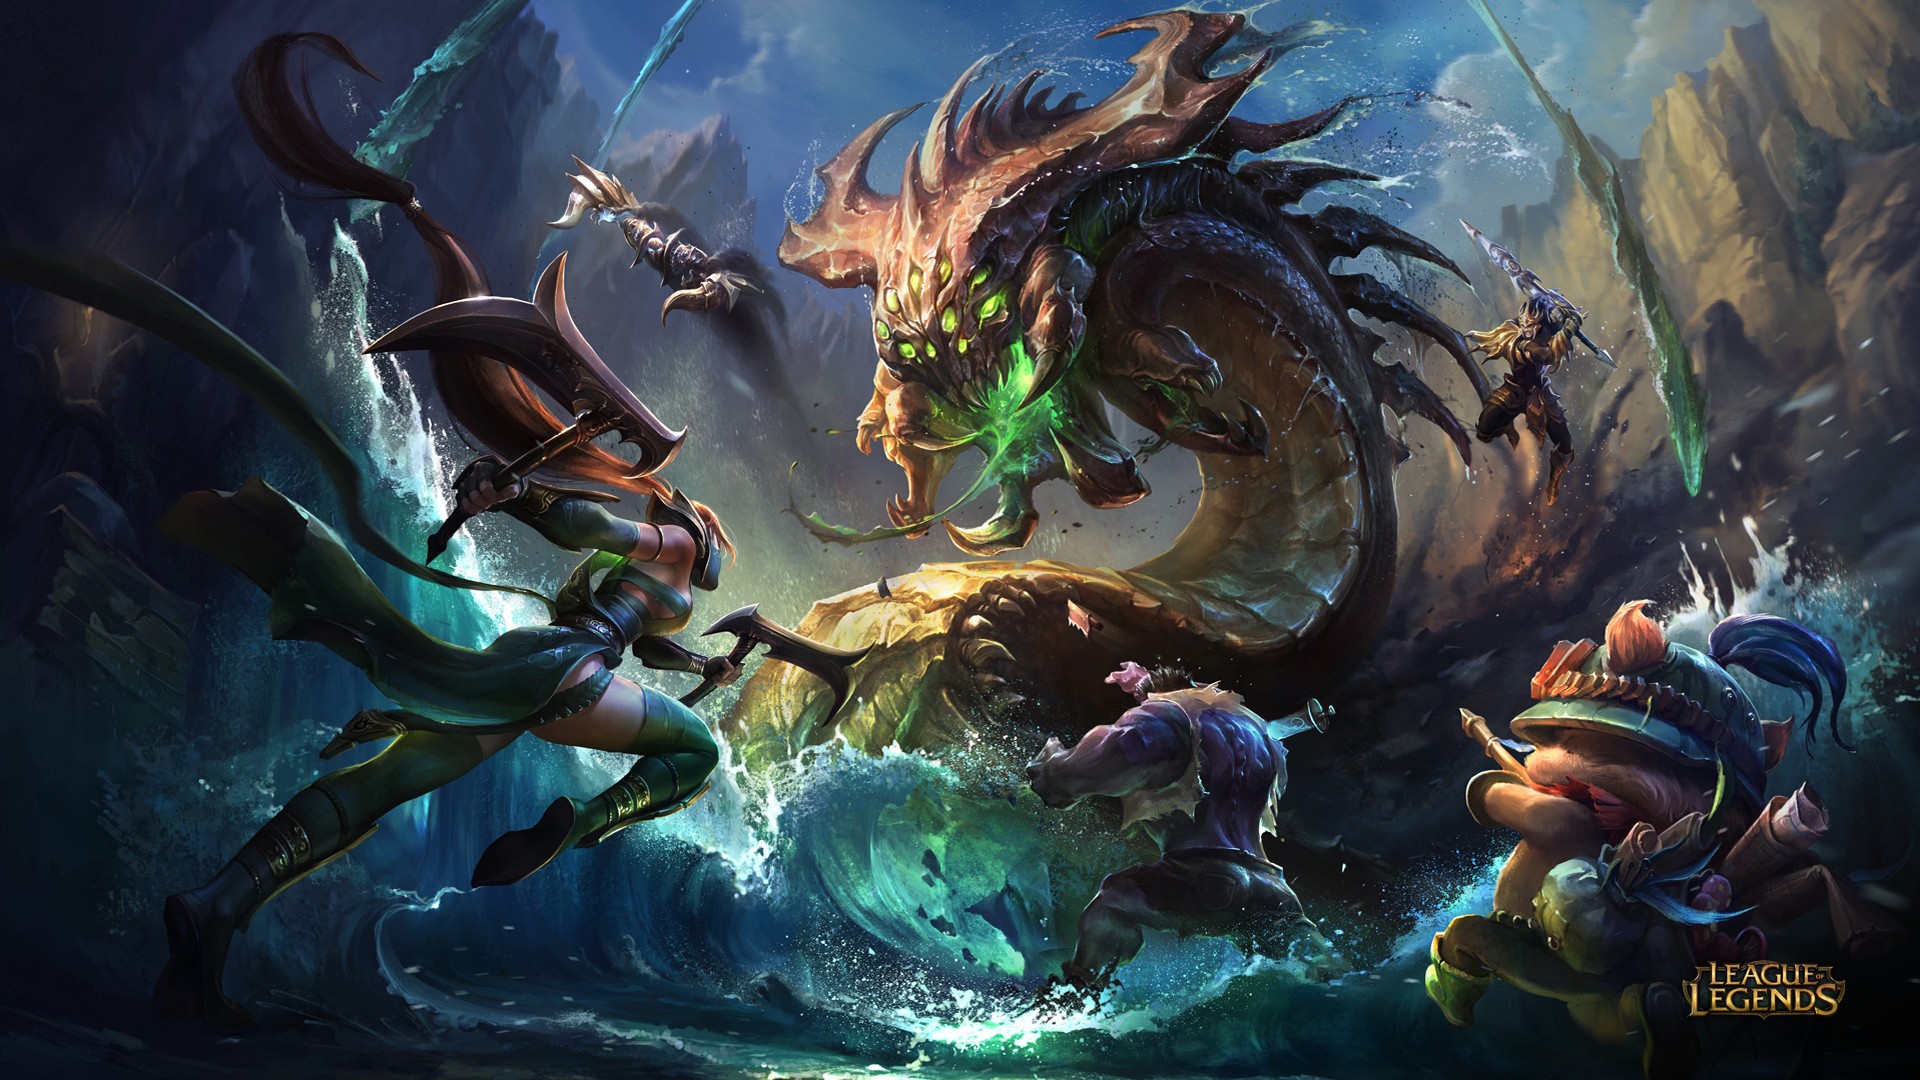 General 1920x1080 League of Legends Teemo Baron Nashor video games fantasy art video game art video game characters moba Akali (League of Legends) Nocturne Jarvan IV (League of Legends) Dr. Mundo (League of Legends) PC gaming creature battle